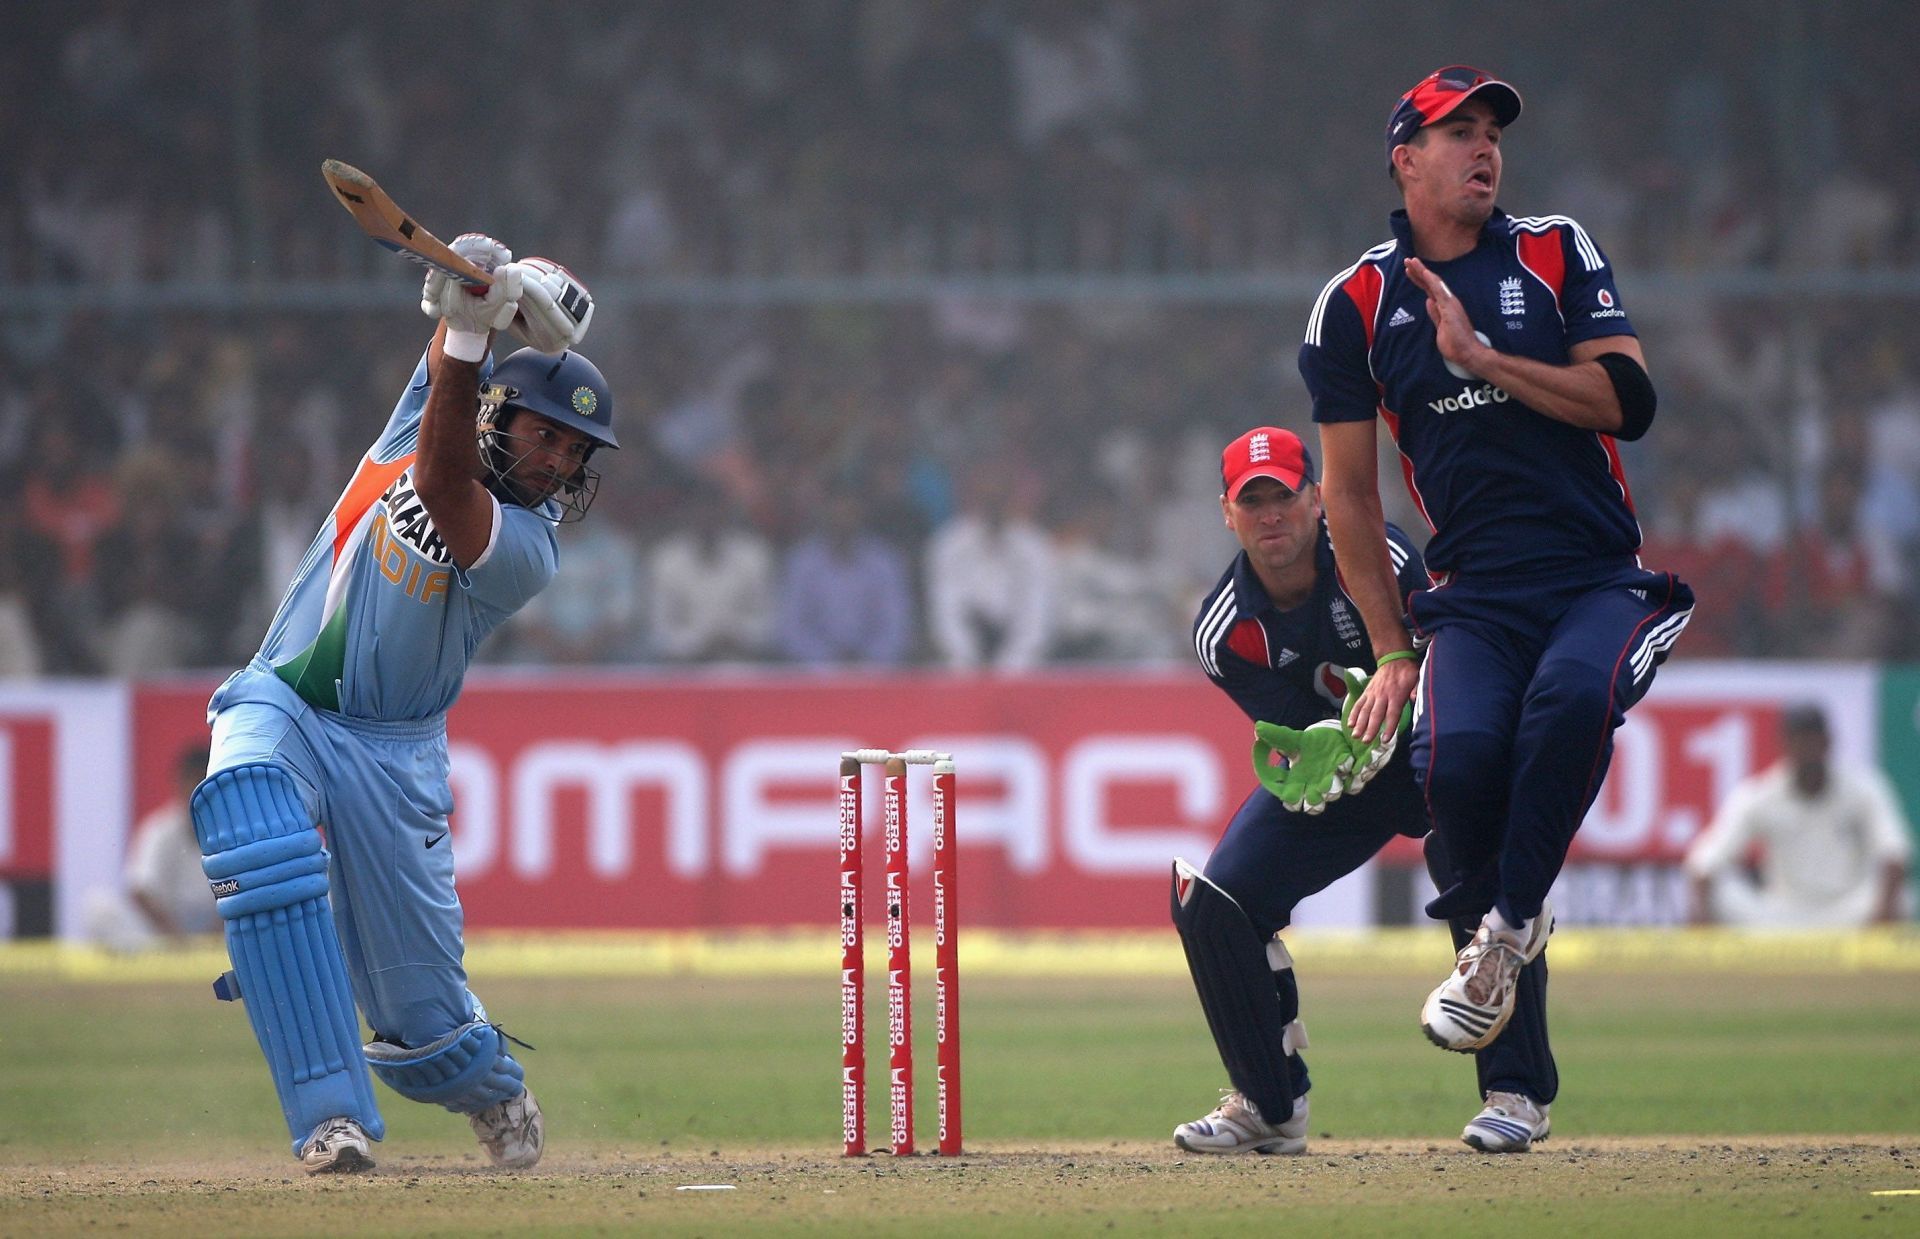 Yuvraj Singh registered his career-best one-day score against England. Pic: Getty Images